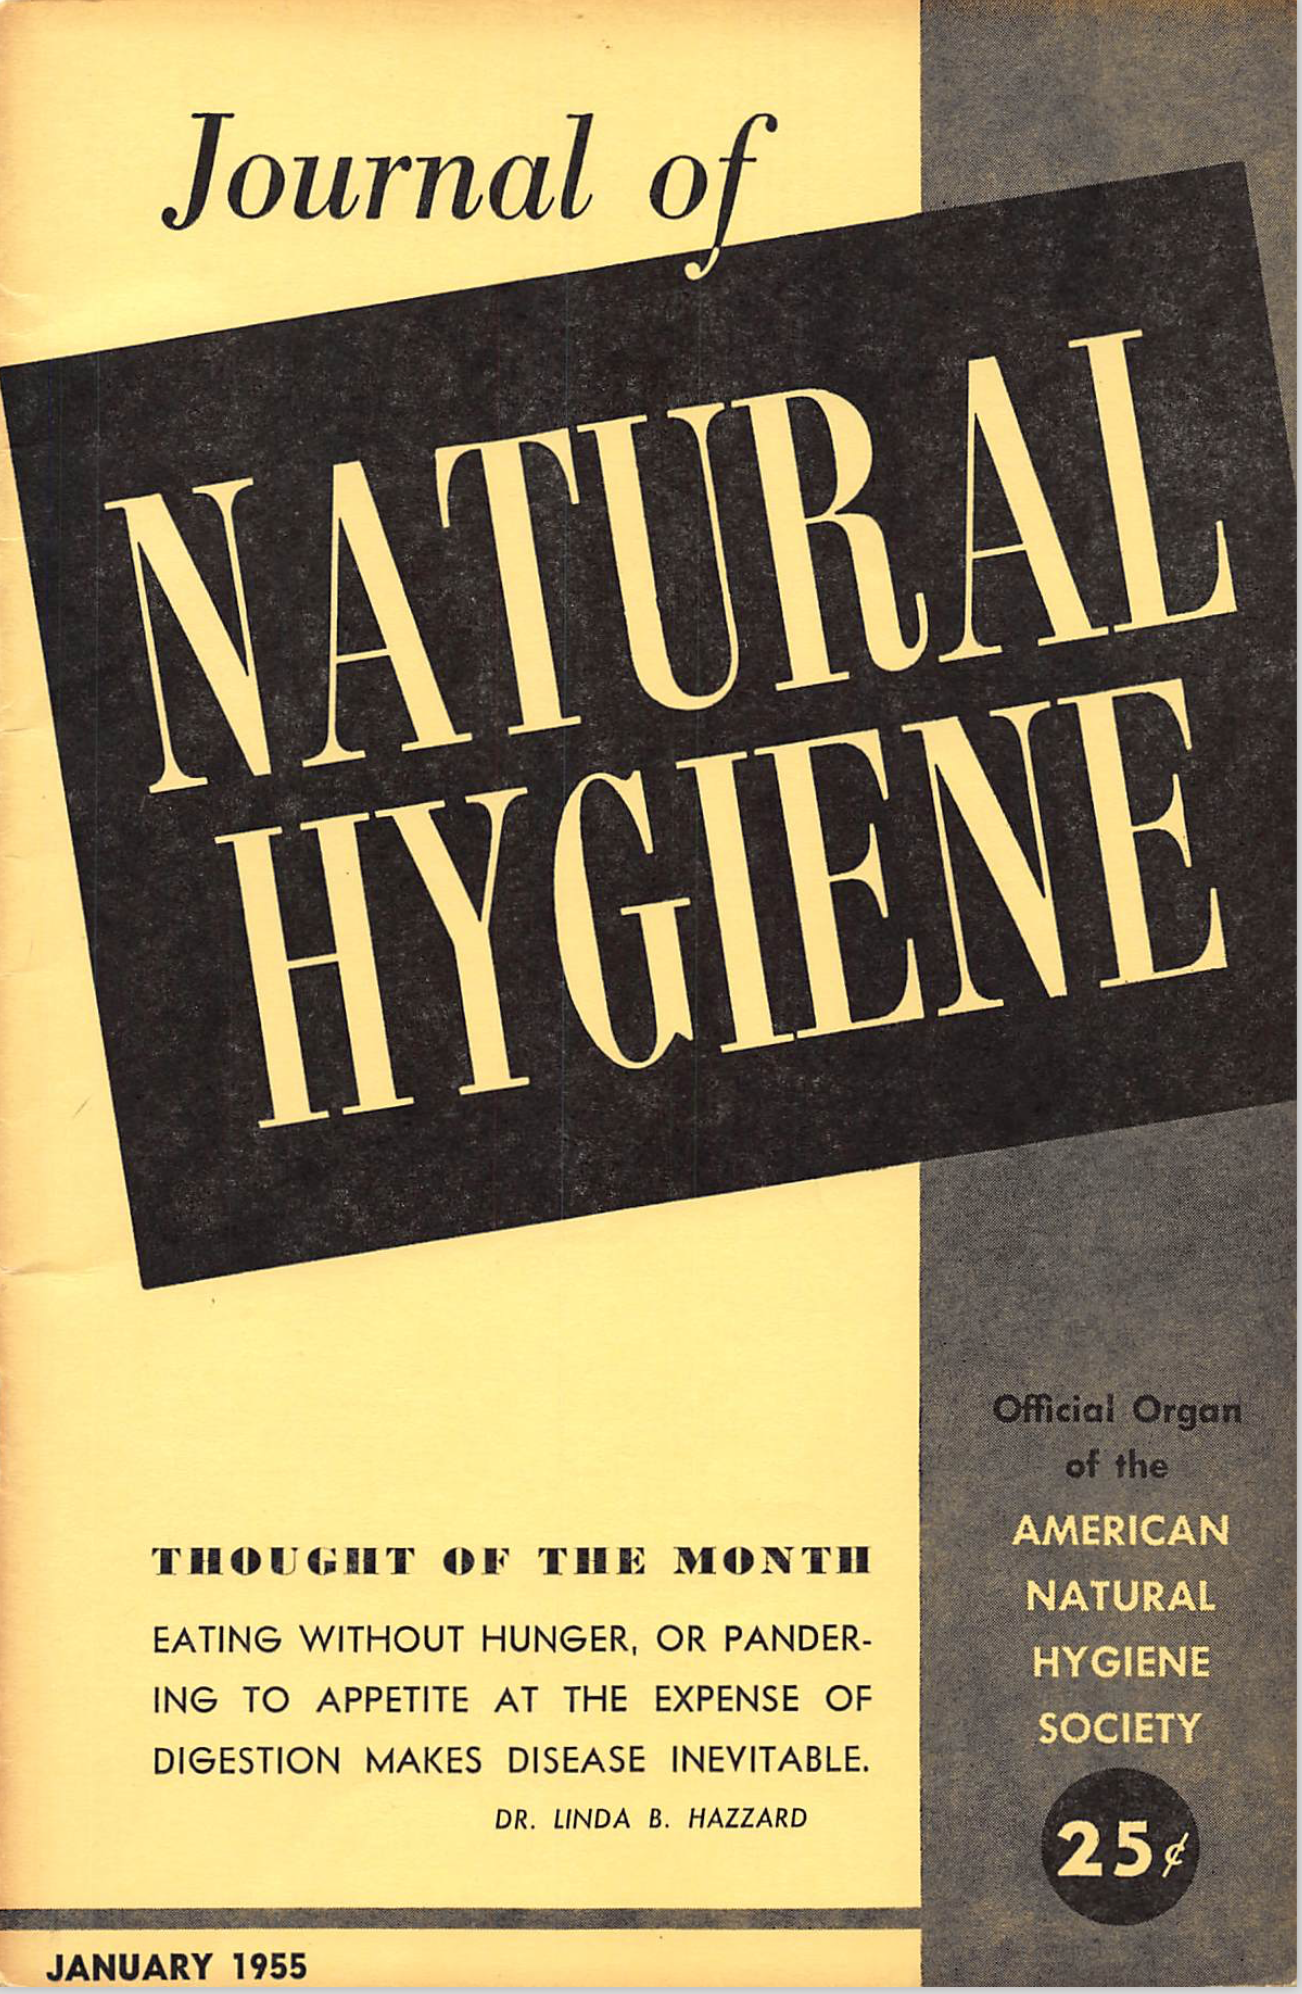 Journal of Natural Hygiene January 1955